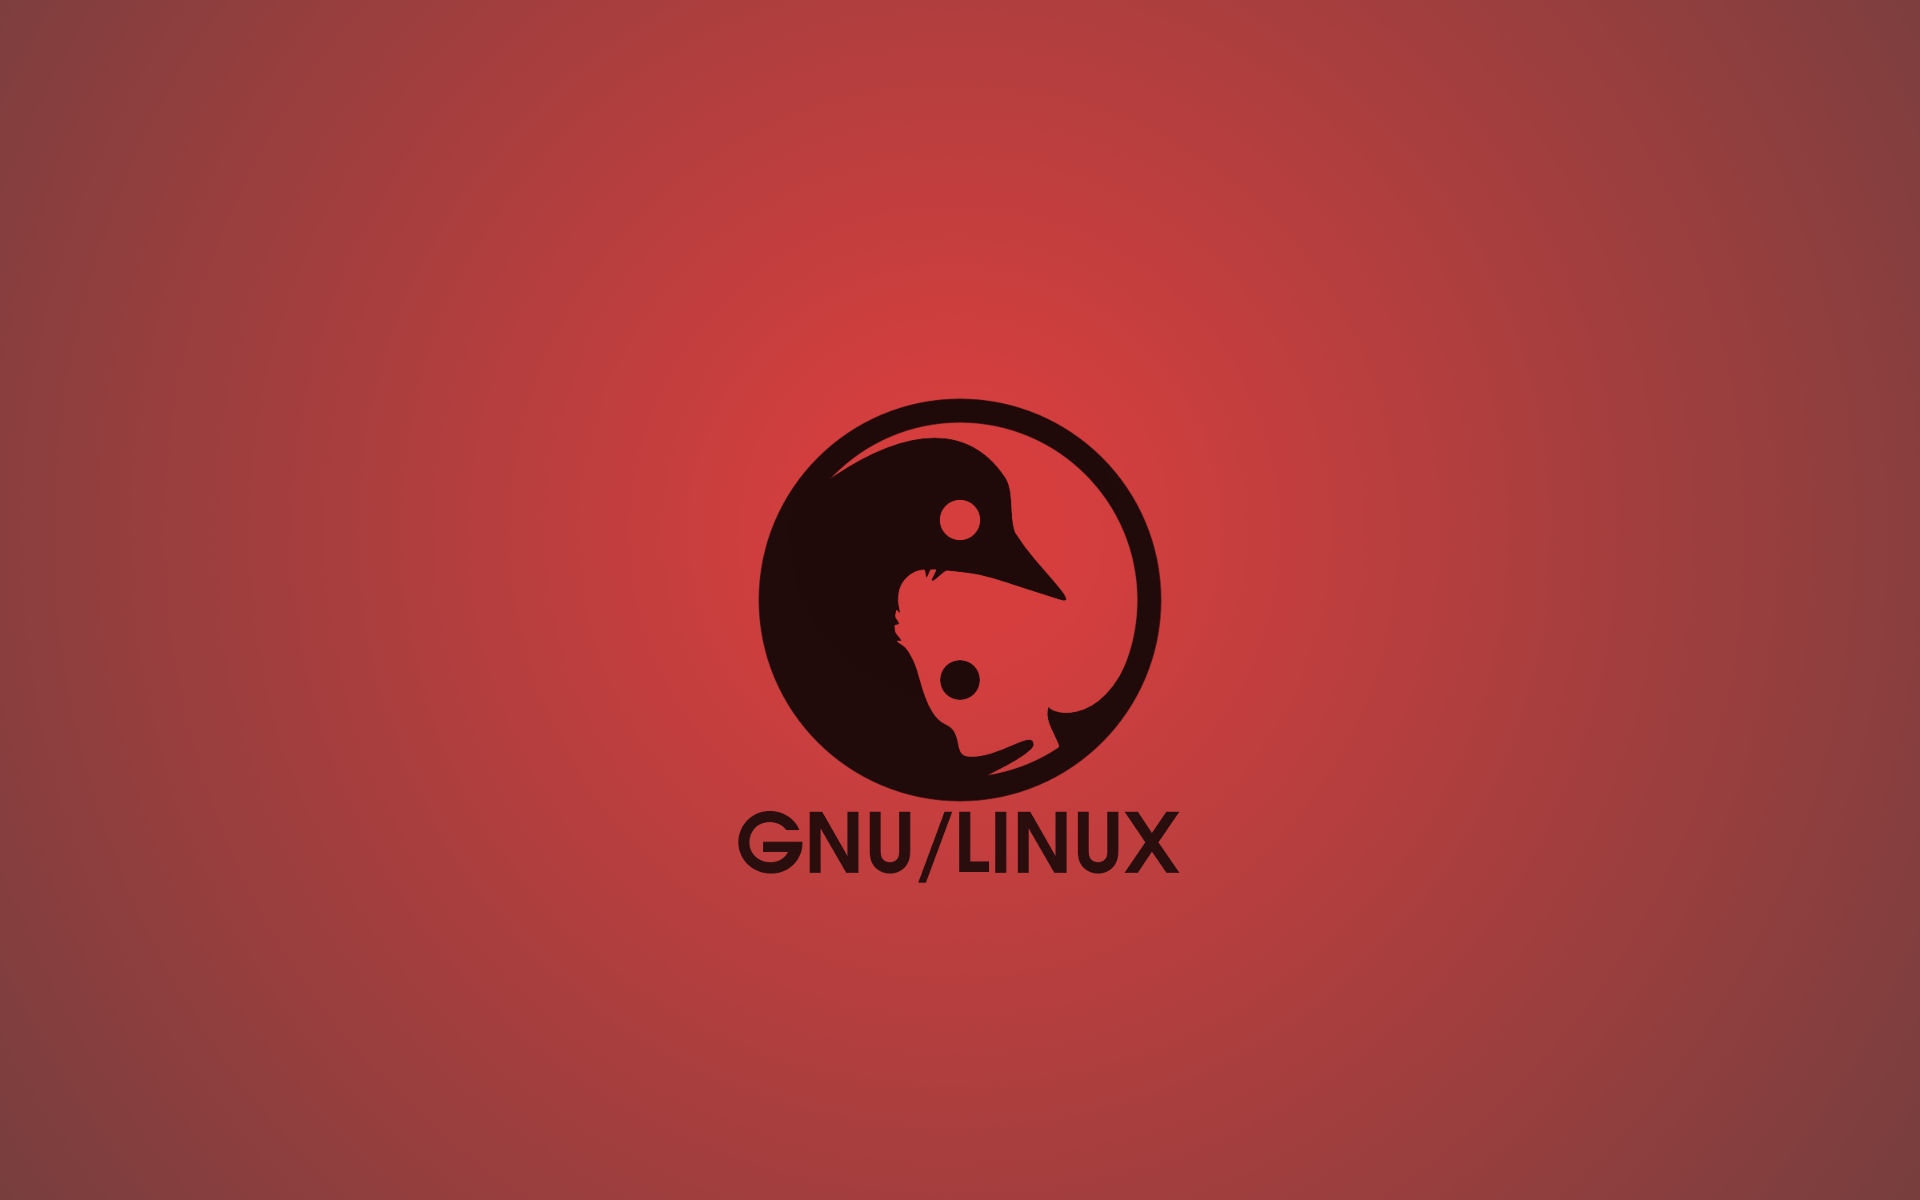 linux, Gnu, Red, Systems, Computer Wallpaper